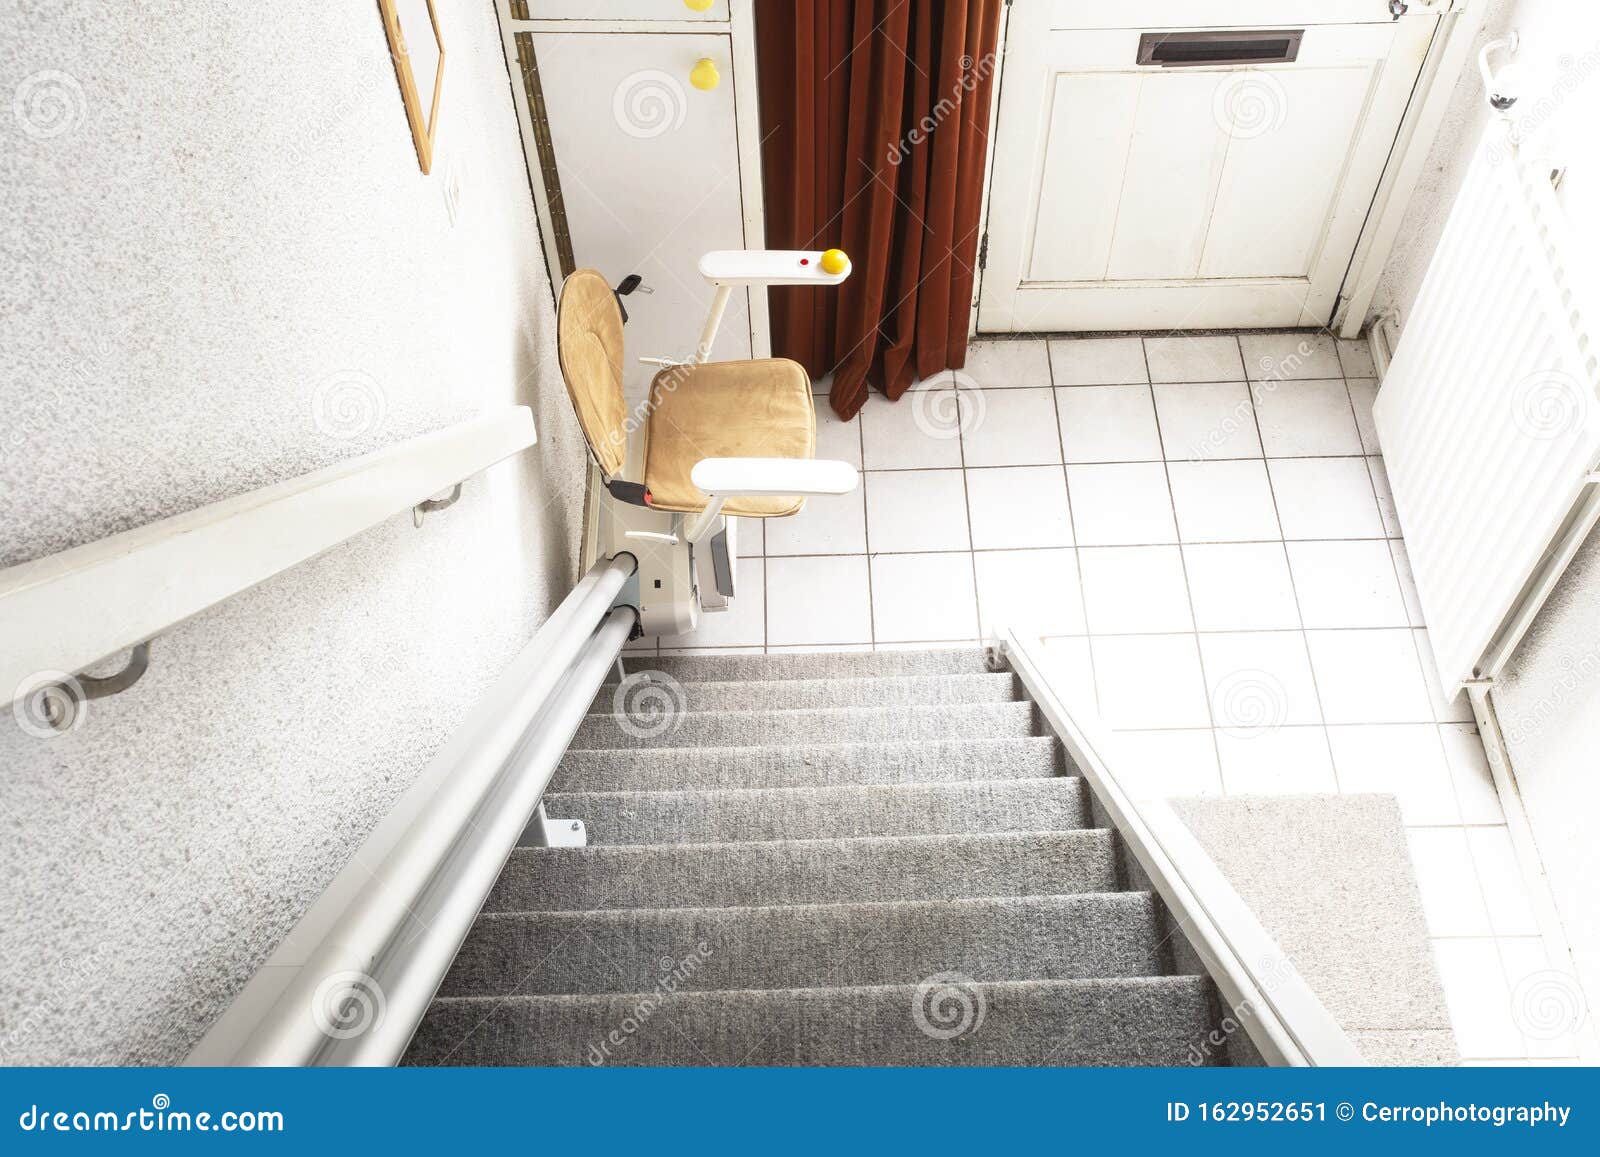 automatic stair lift on staircase taking elderly people and disabled persons up and down in a house